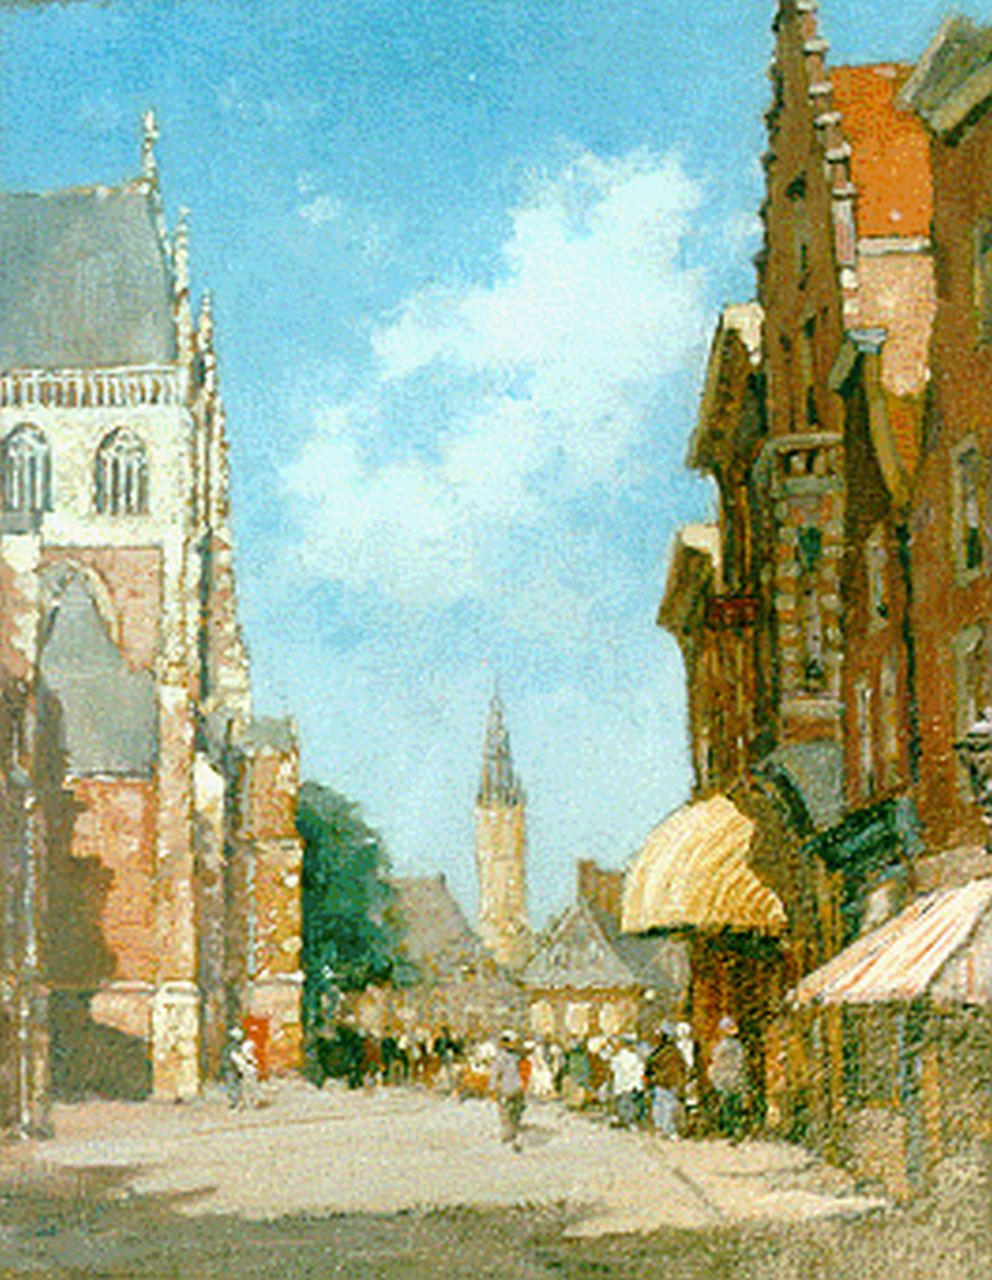 Heuff H.D.  | 'Herman' Davinus Heuff, Townscape, Haarlem, 31.7 x 25.1 cm, signed l.l. and dated '18